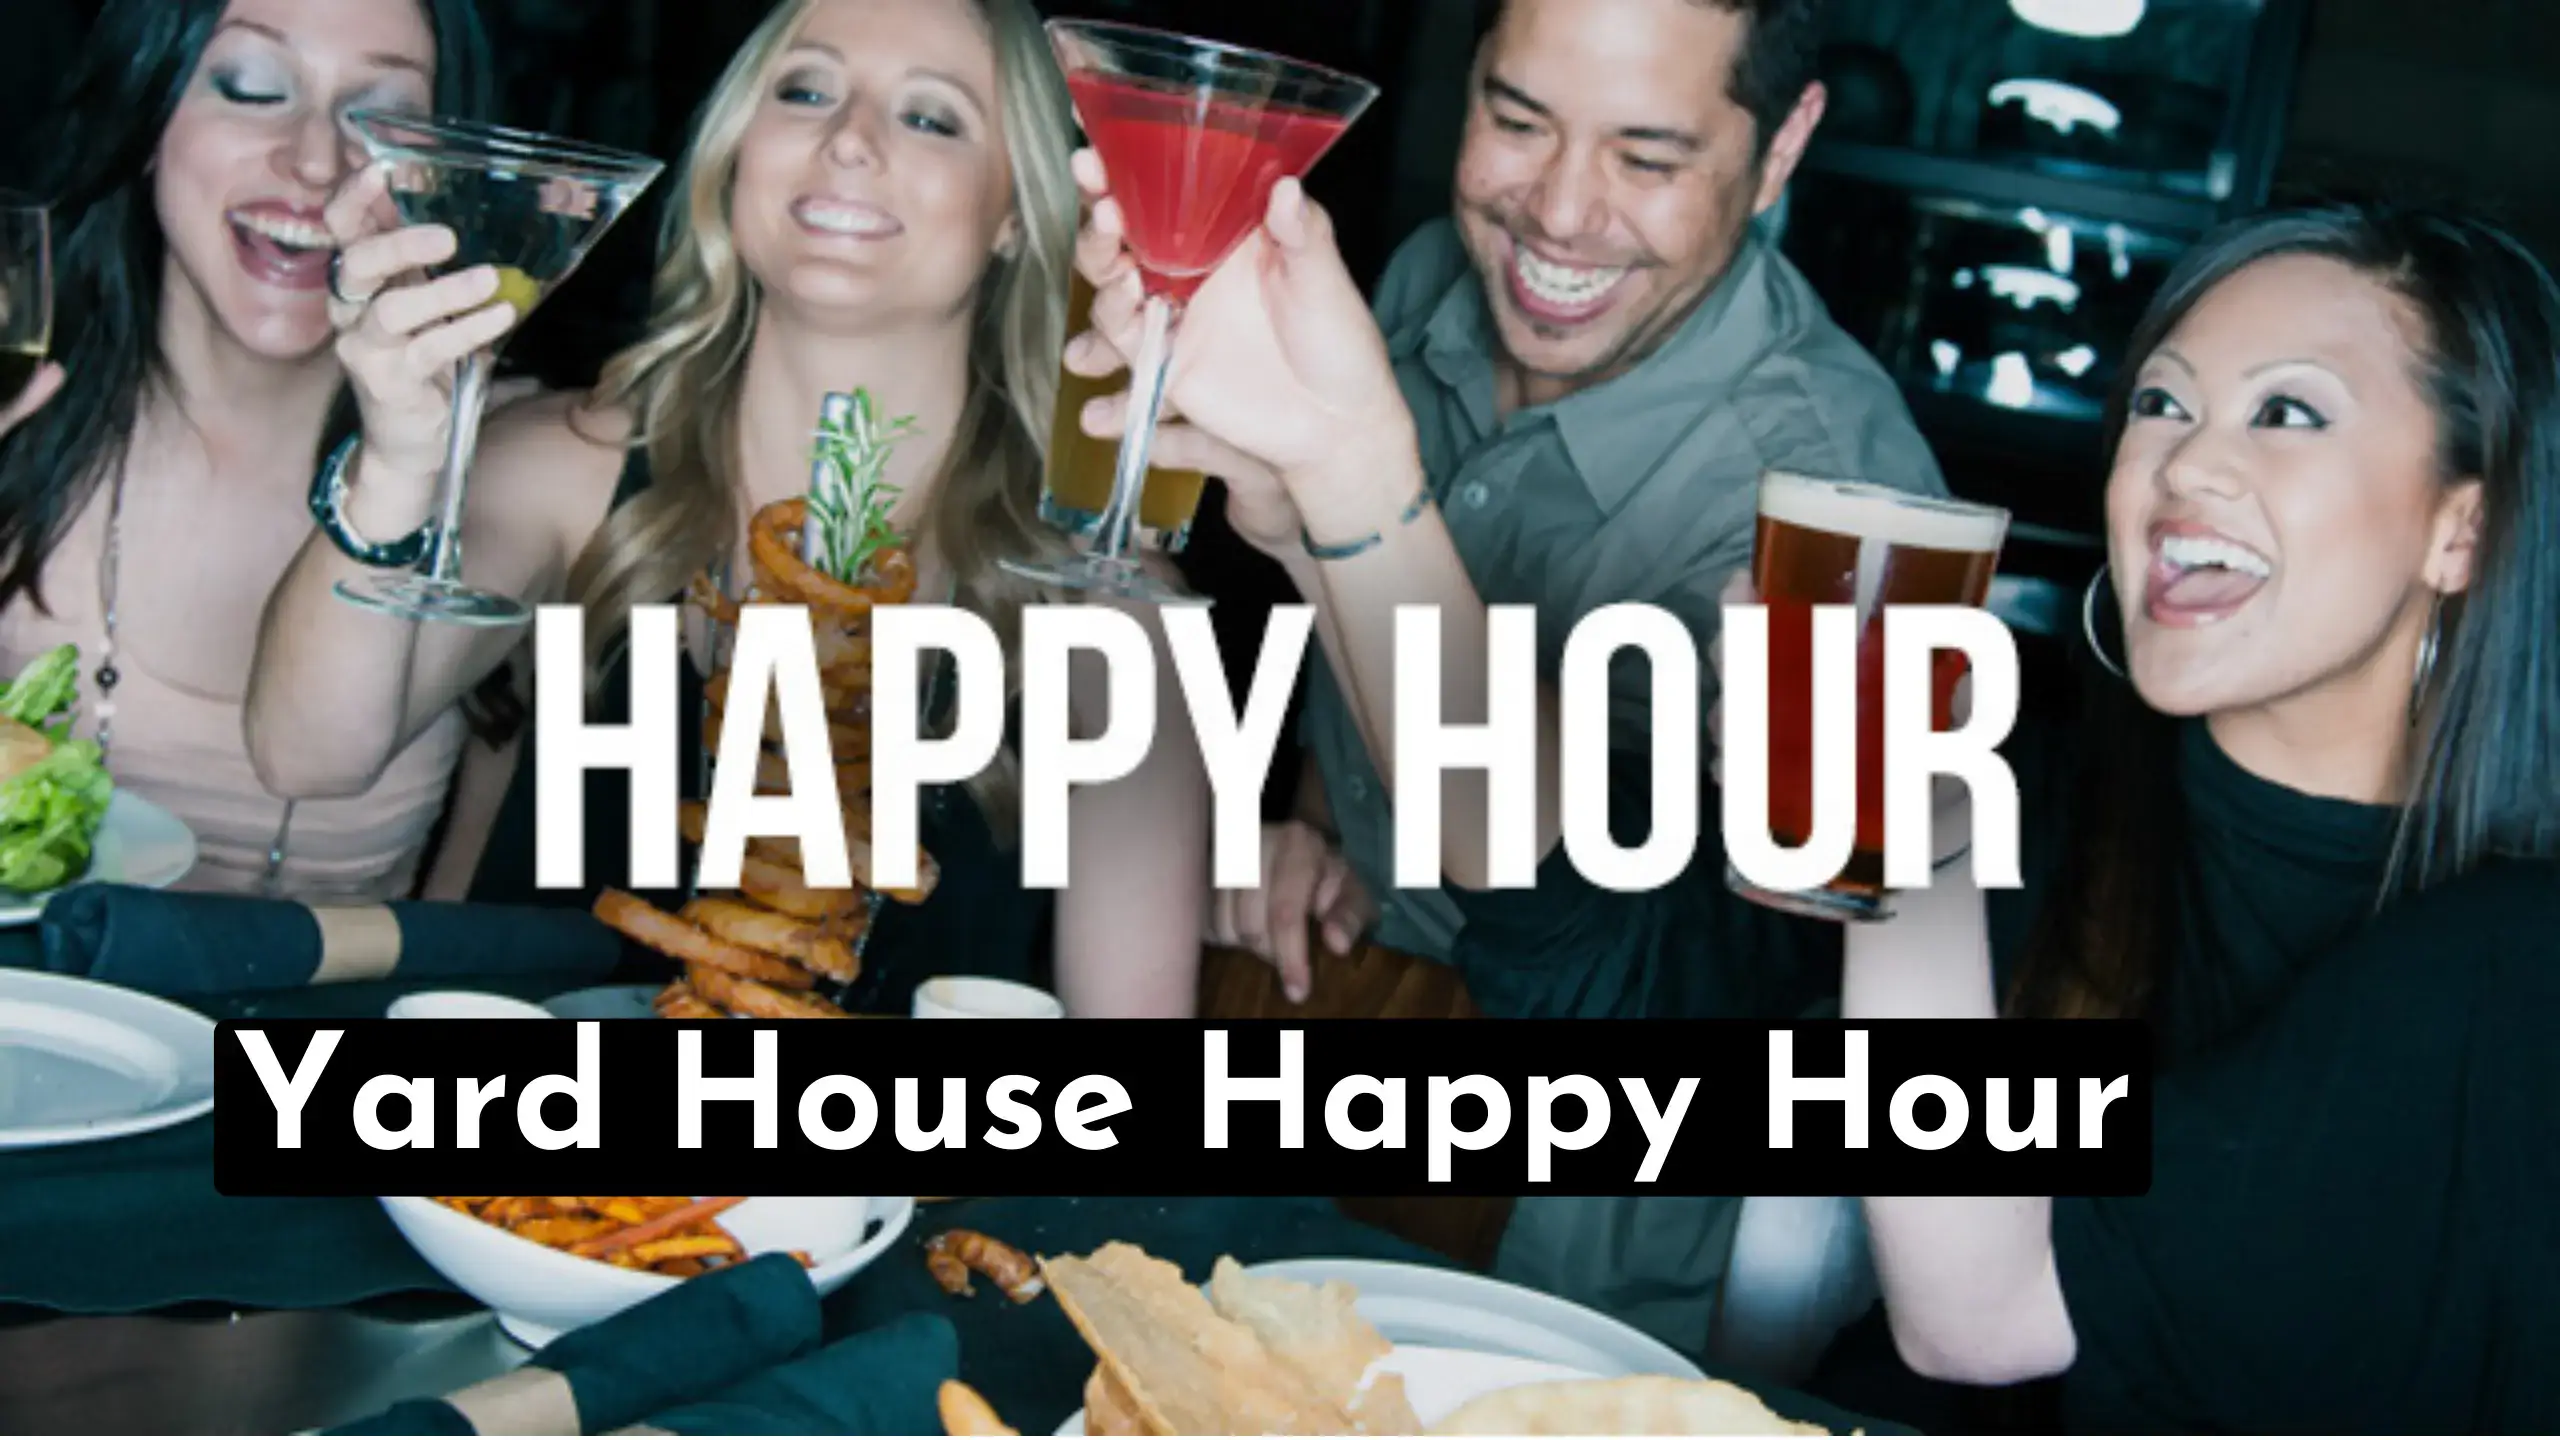 A Quick Guide To Find Yard House Happy Hour Timings Near You | Also Quickly Find Yard House Happy Hour Menu With Related FAQs. store-hour.com